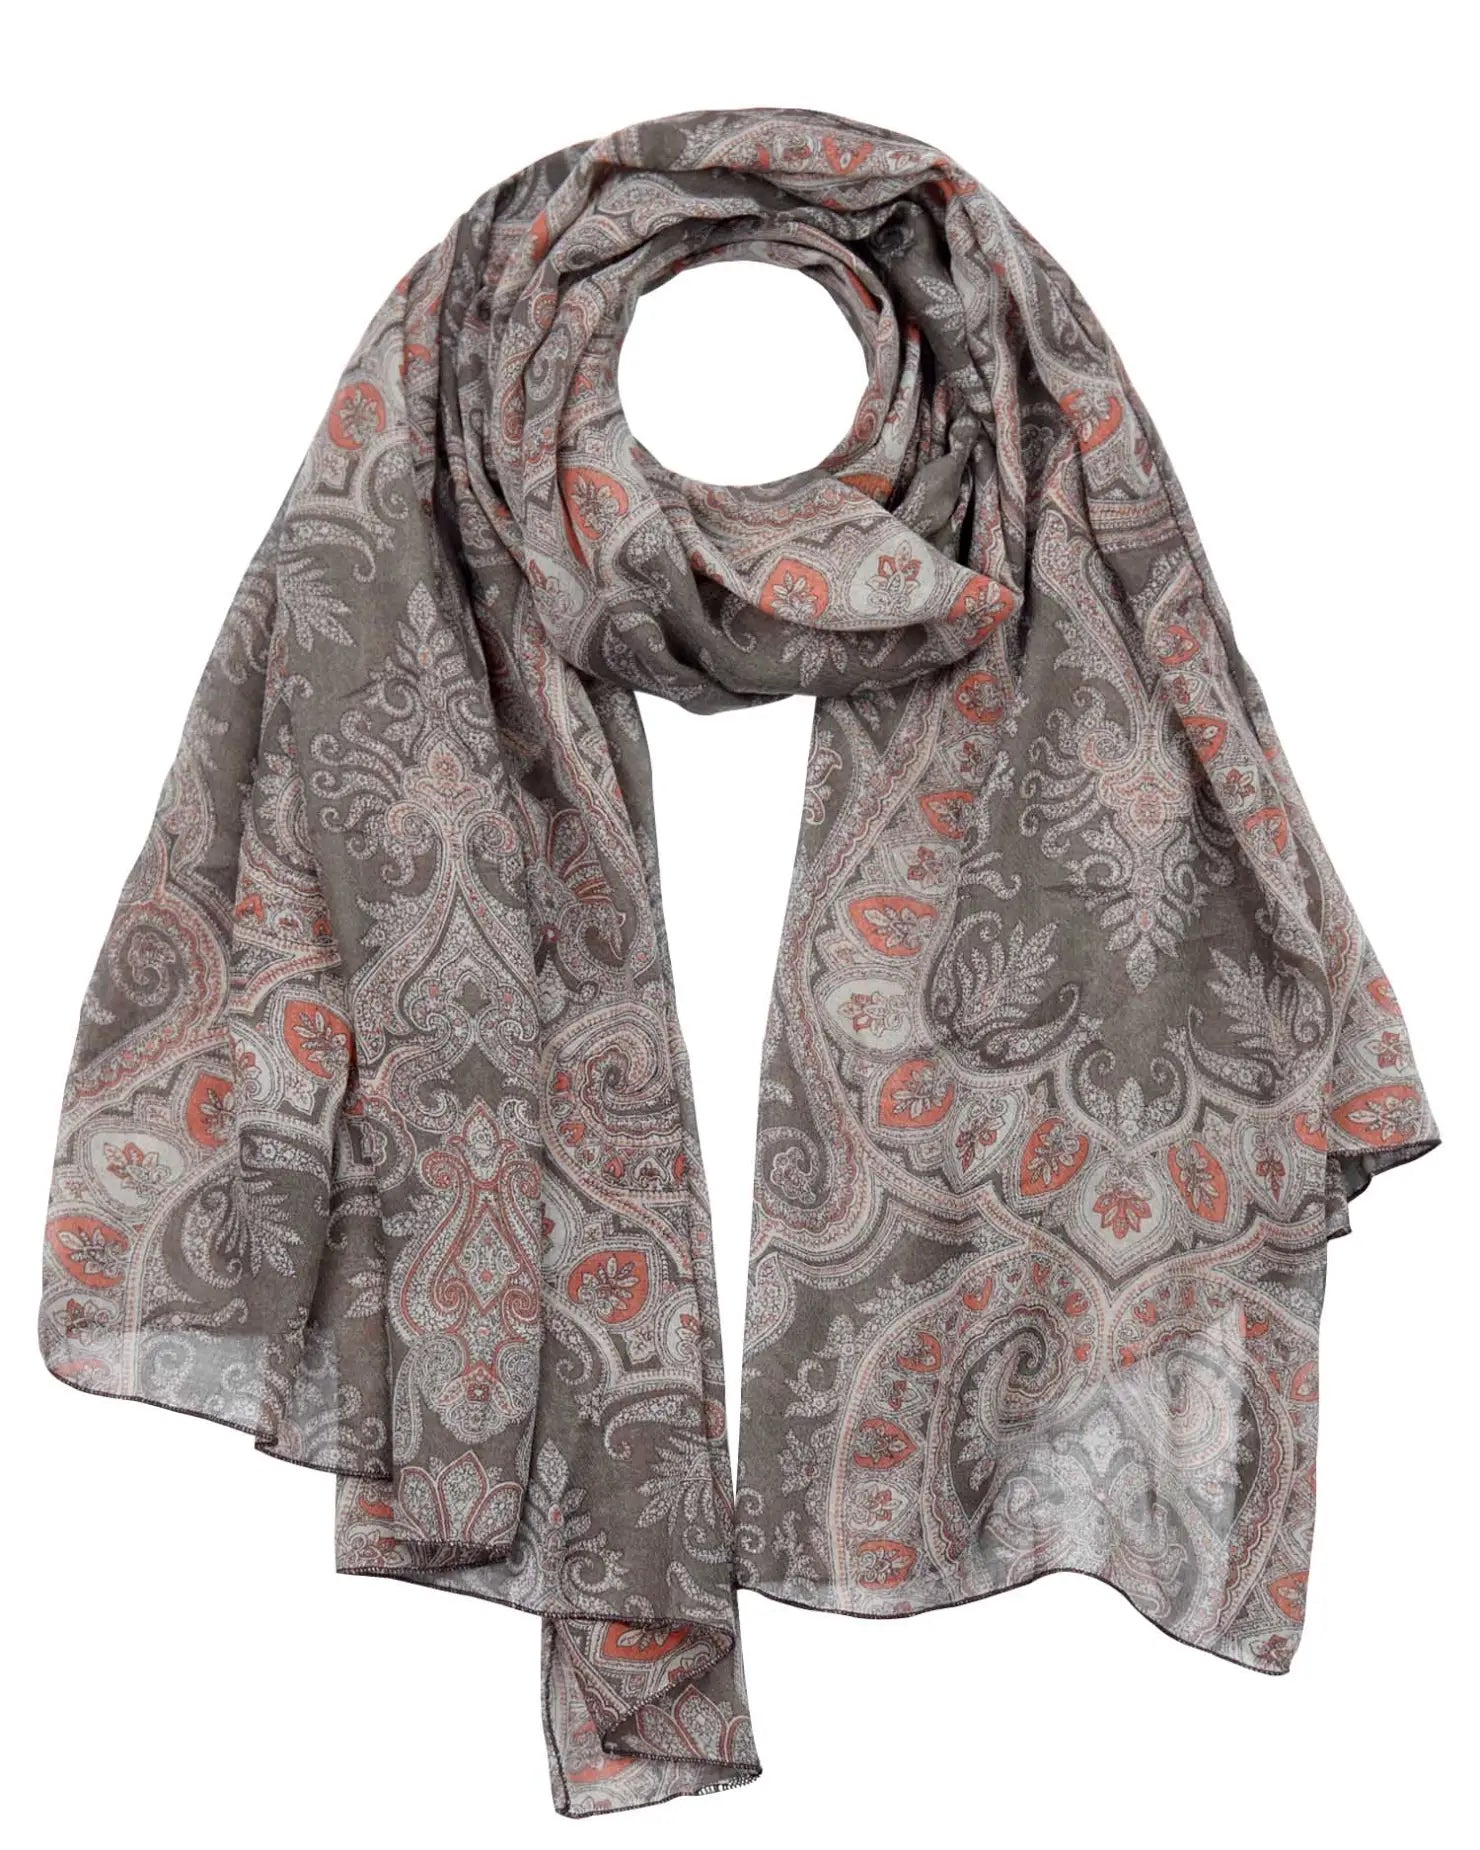 Paisley floral maxi oversized scarf with paisley print